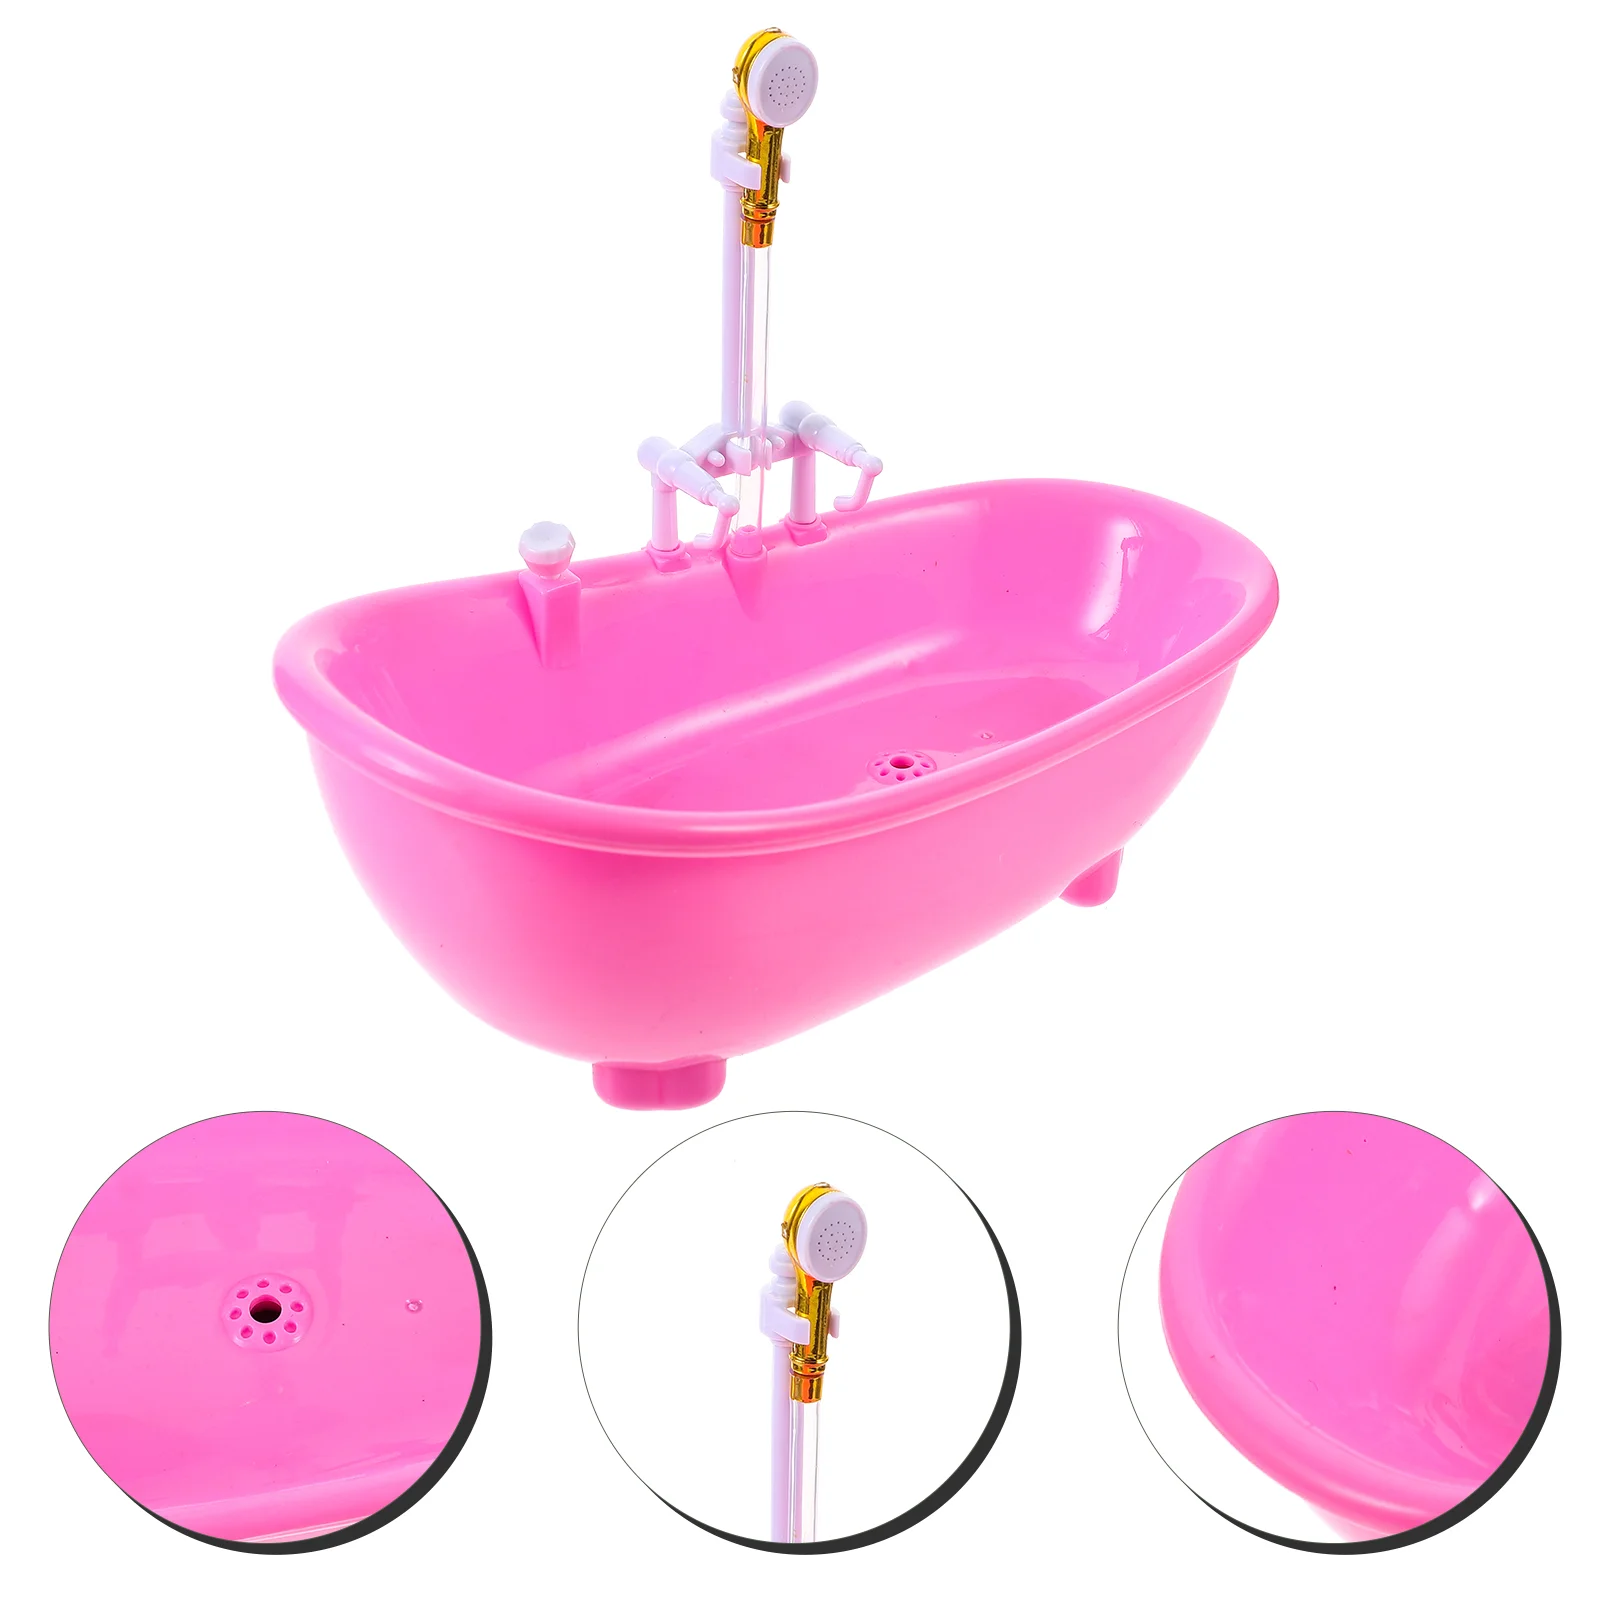 

Electric Water Spraying Bathtub Swimming Pool with Sprayer without for (Pink)